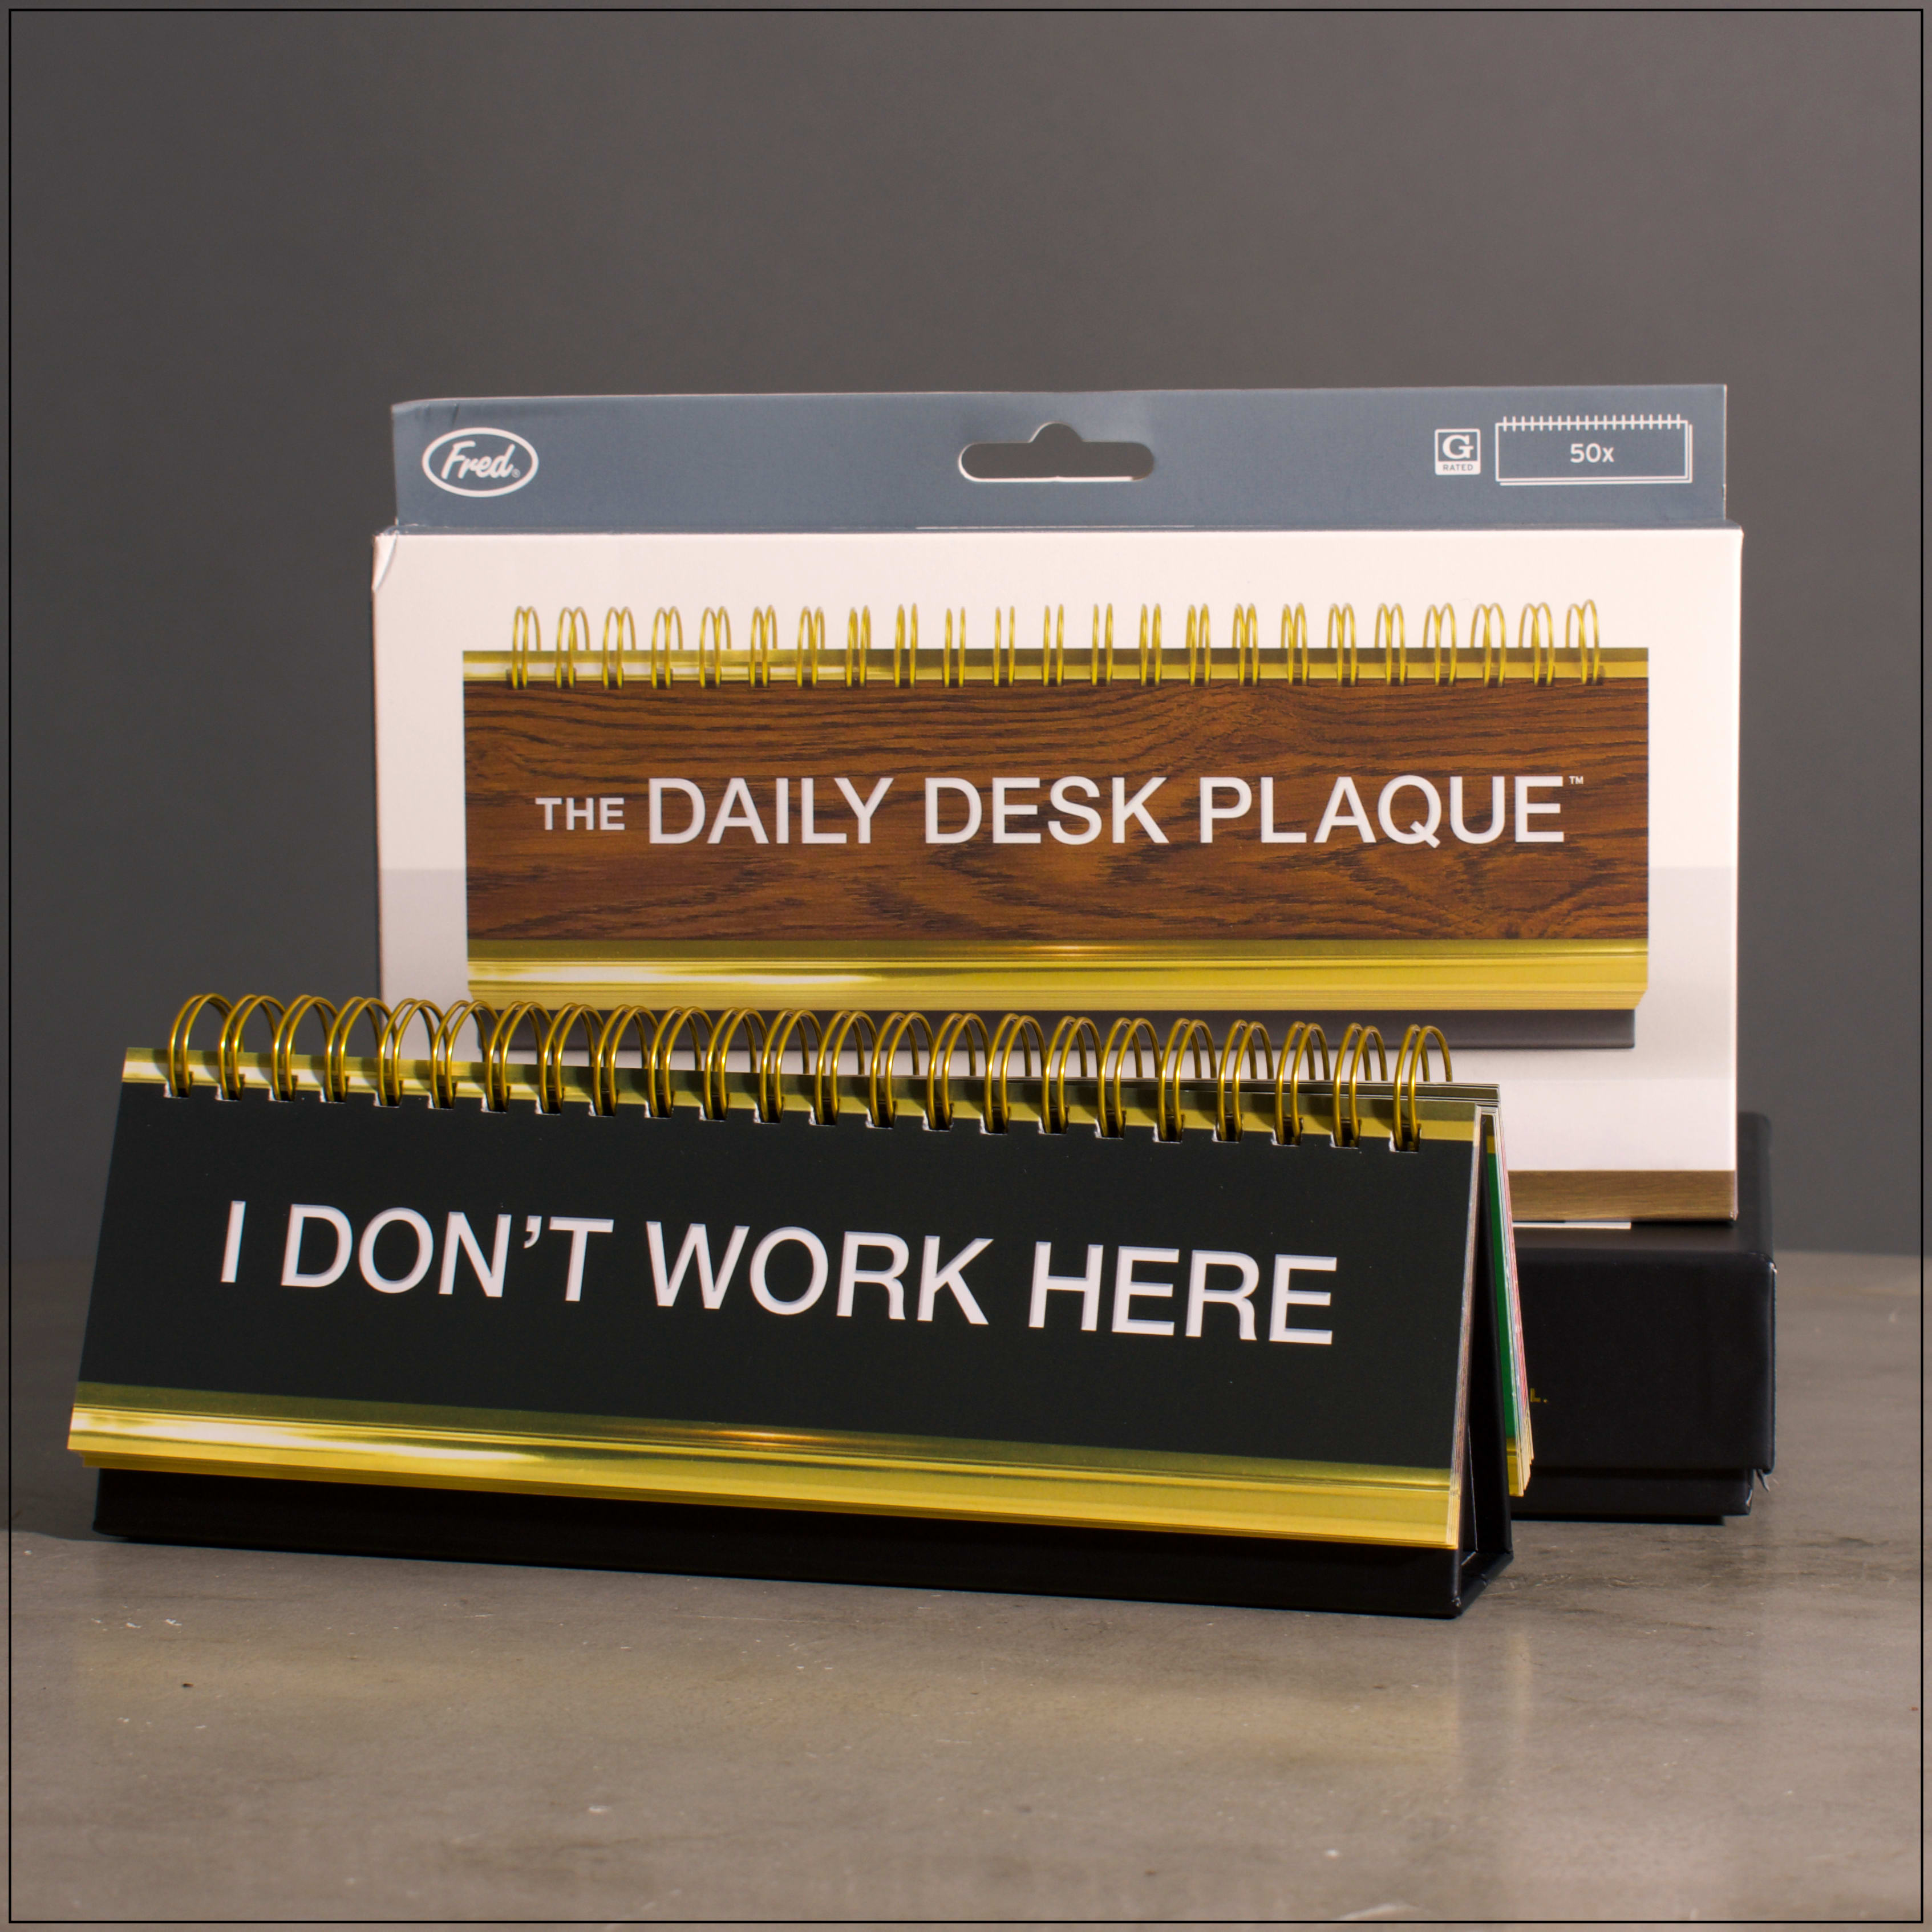 The Daily Desk Plaque - We get it. You’re kind of a big deal and want your desk to reflect that. Fred’s Daily Desk Plaque shows off your witty side and alerts your workmates about how you’re feeling. The desktop flip book contains 50 titles and phrases so there is always one to fit your vibe.